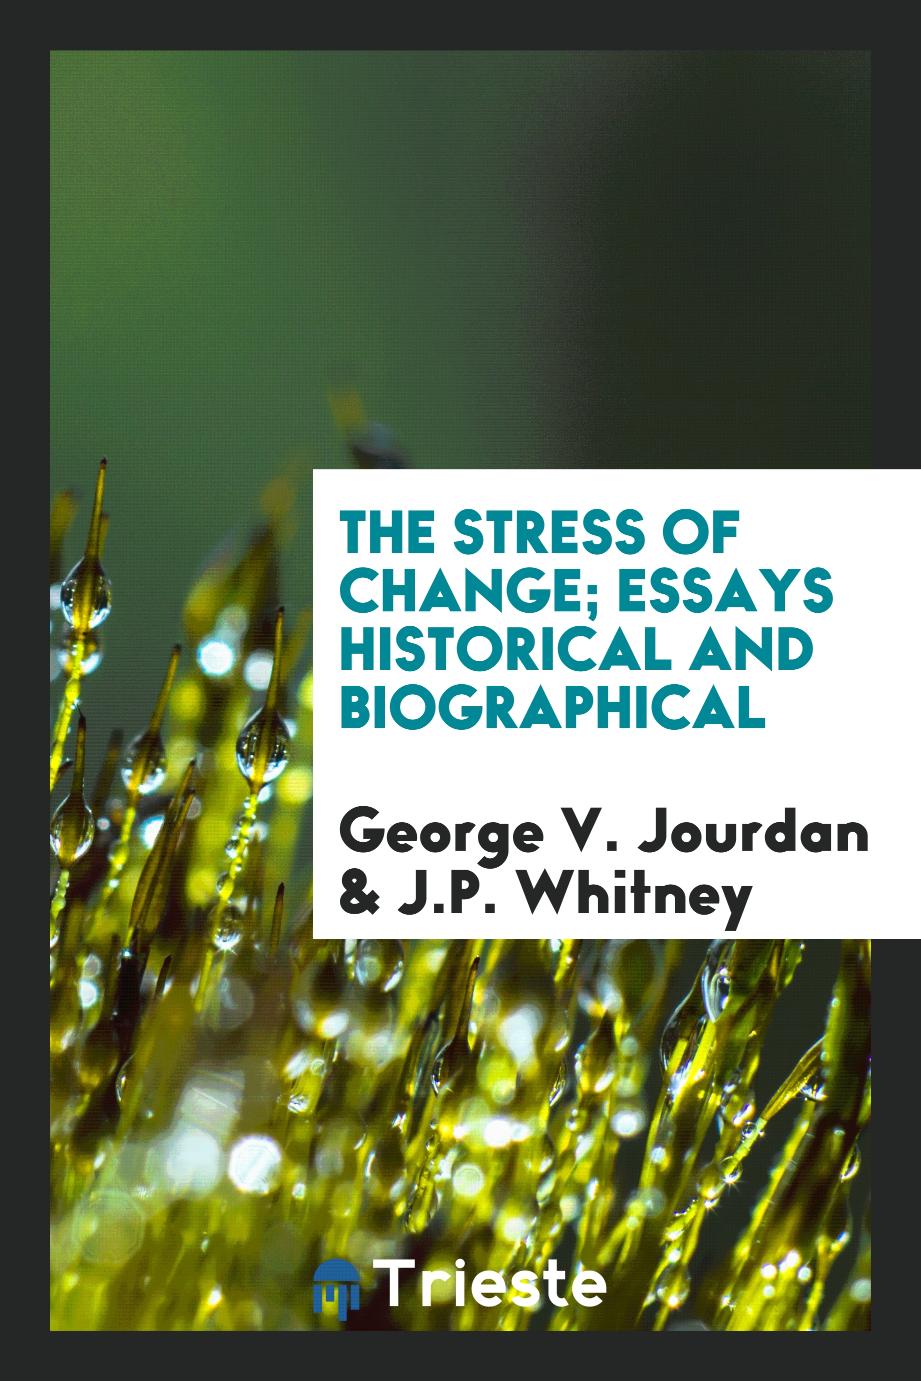 The stress of change; essays historical and biographical